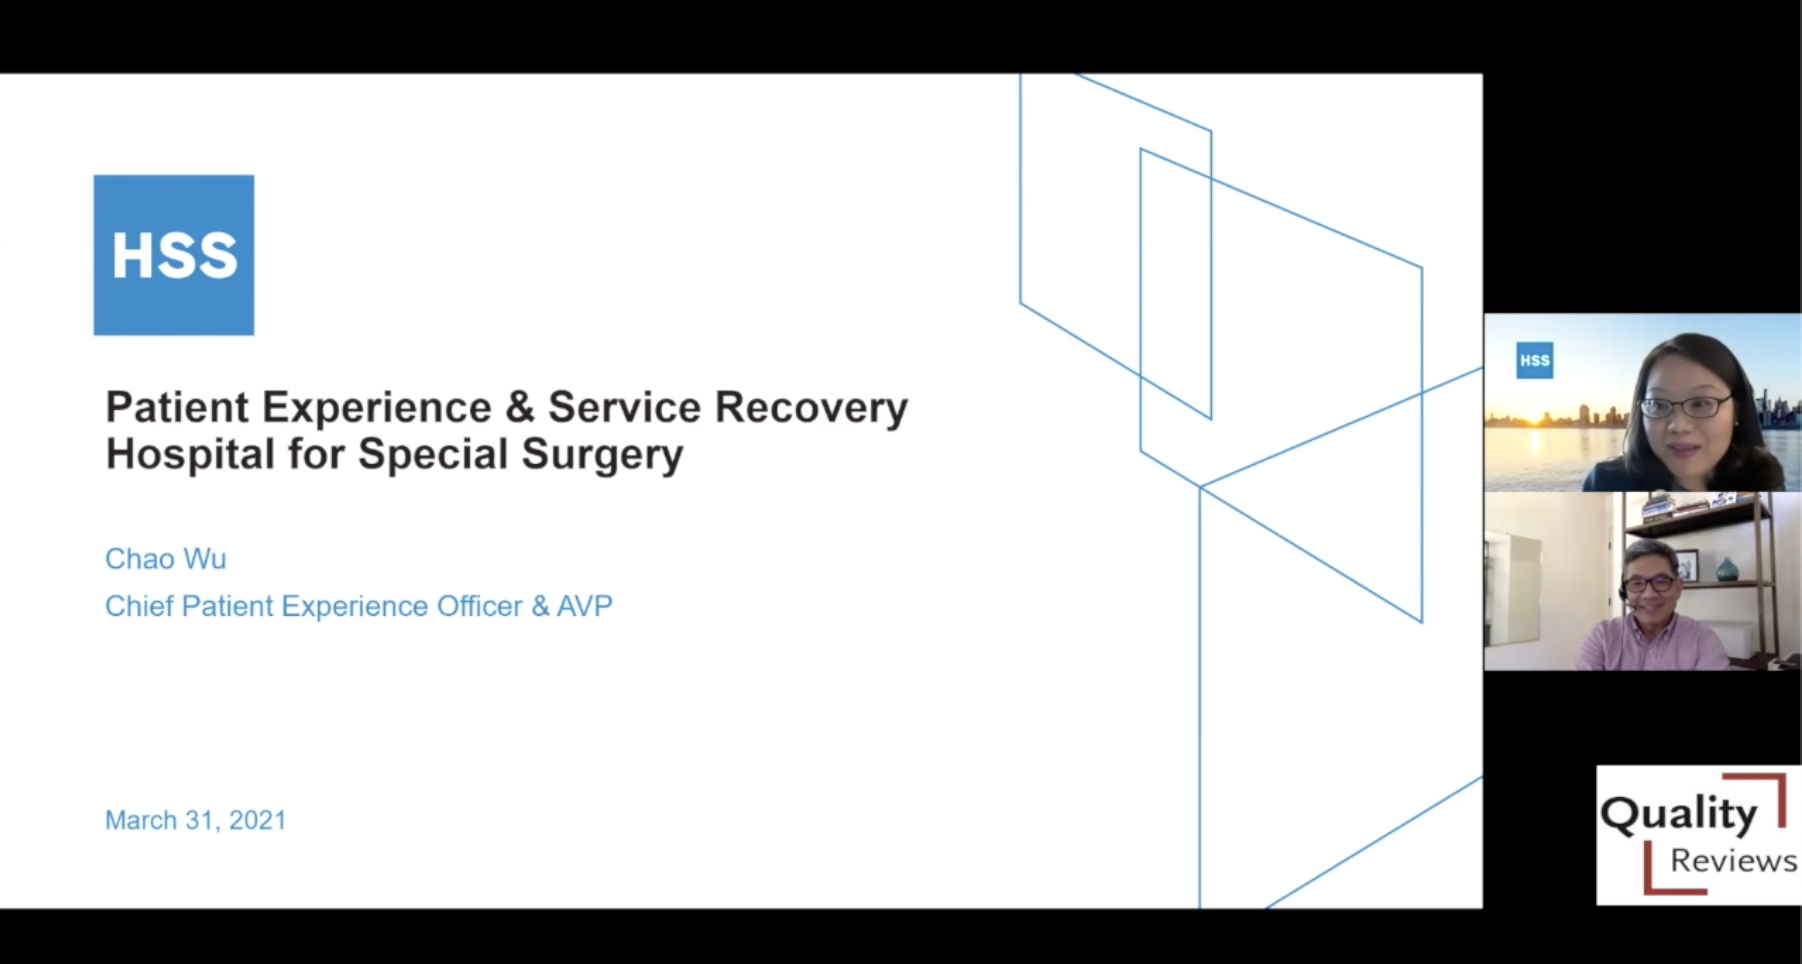 Patient Experience and Service Recovery at the Hospital for Special Surgery